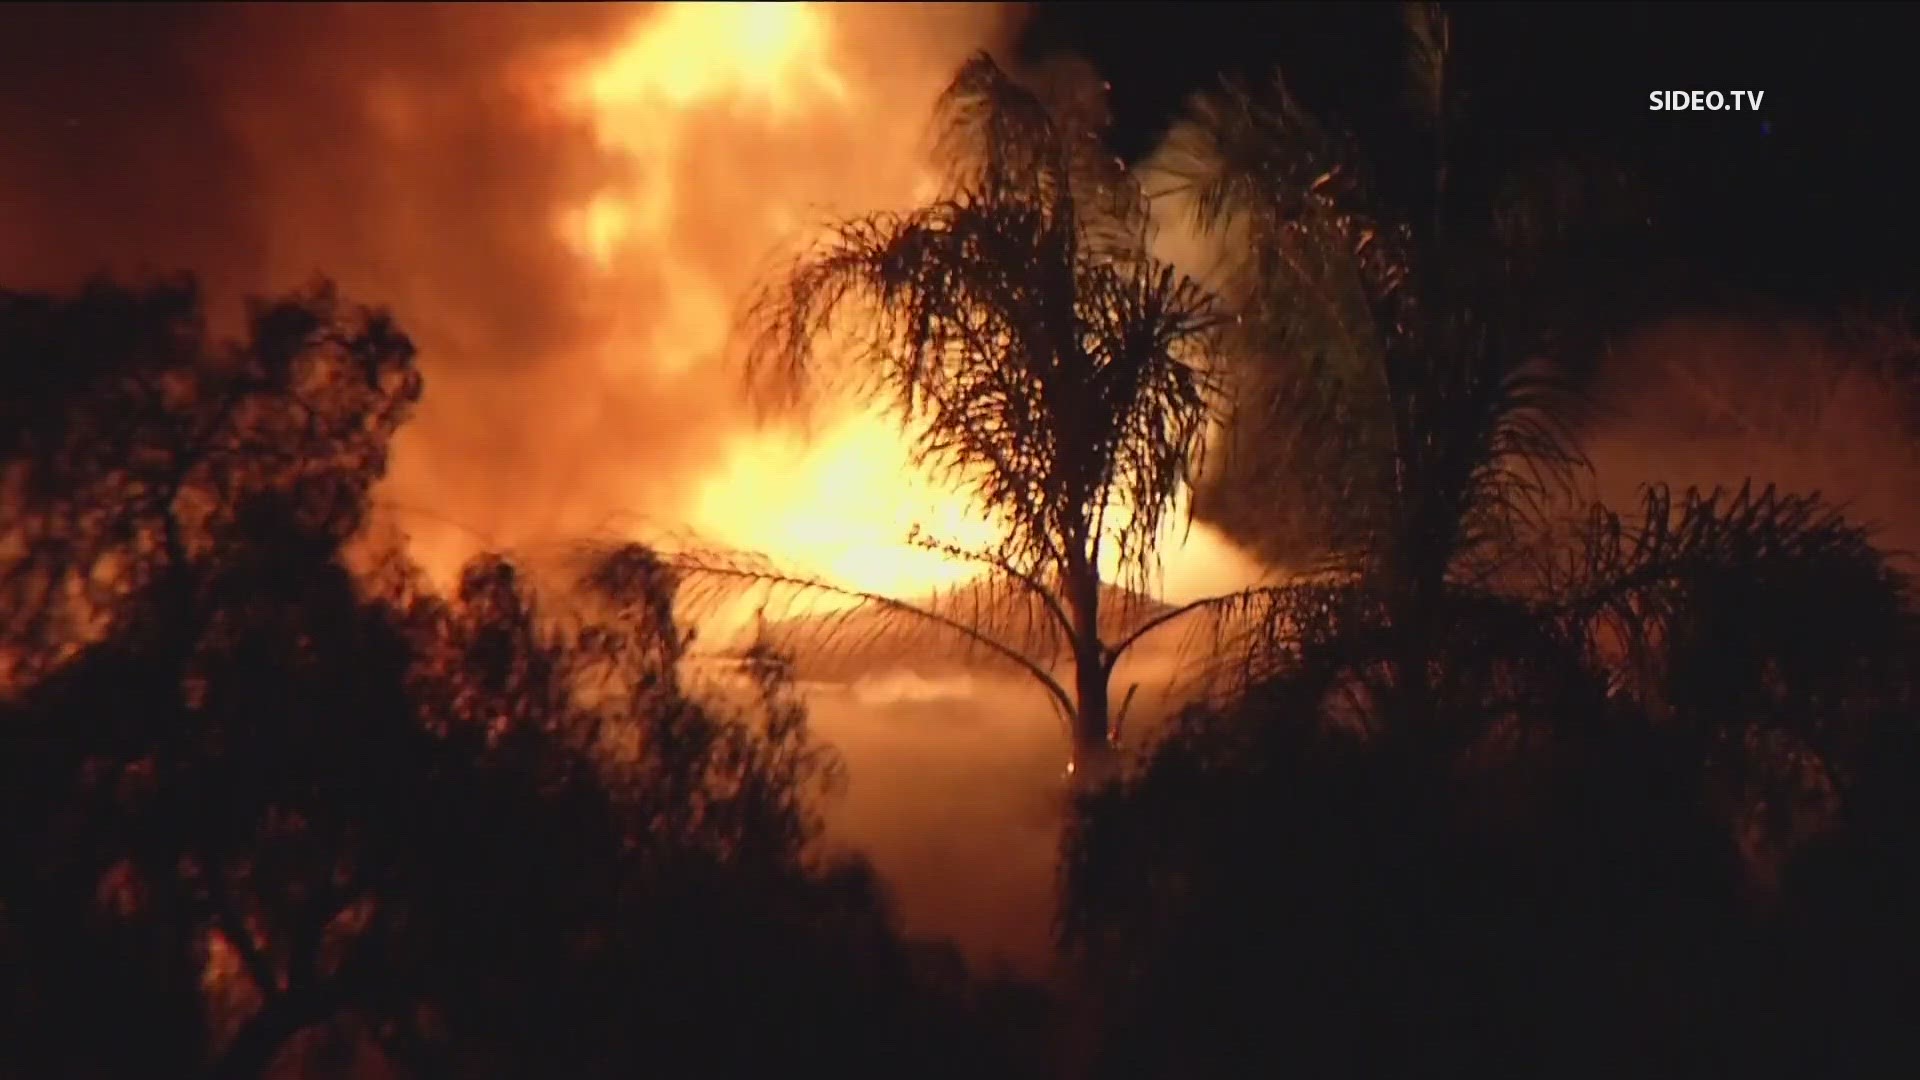 The Santee Fire Department told CBS 8 the fire was stubborn, taking nearly a half-hour to put out with more than 40 firefighters on scene.